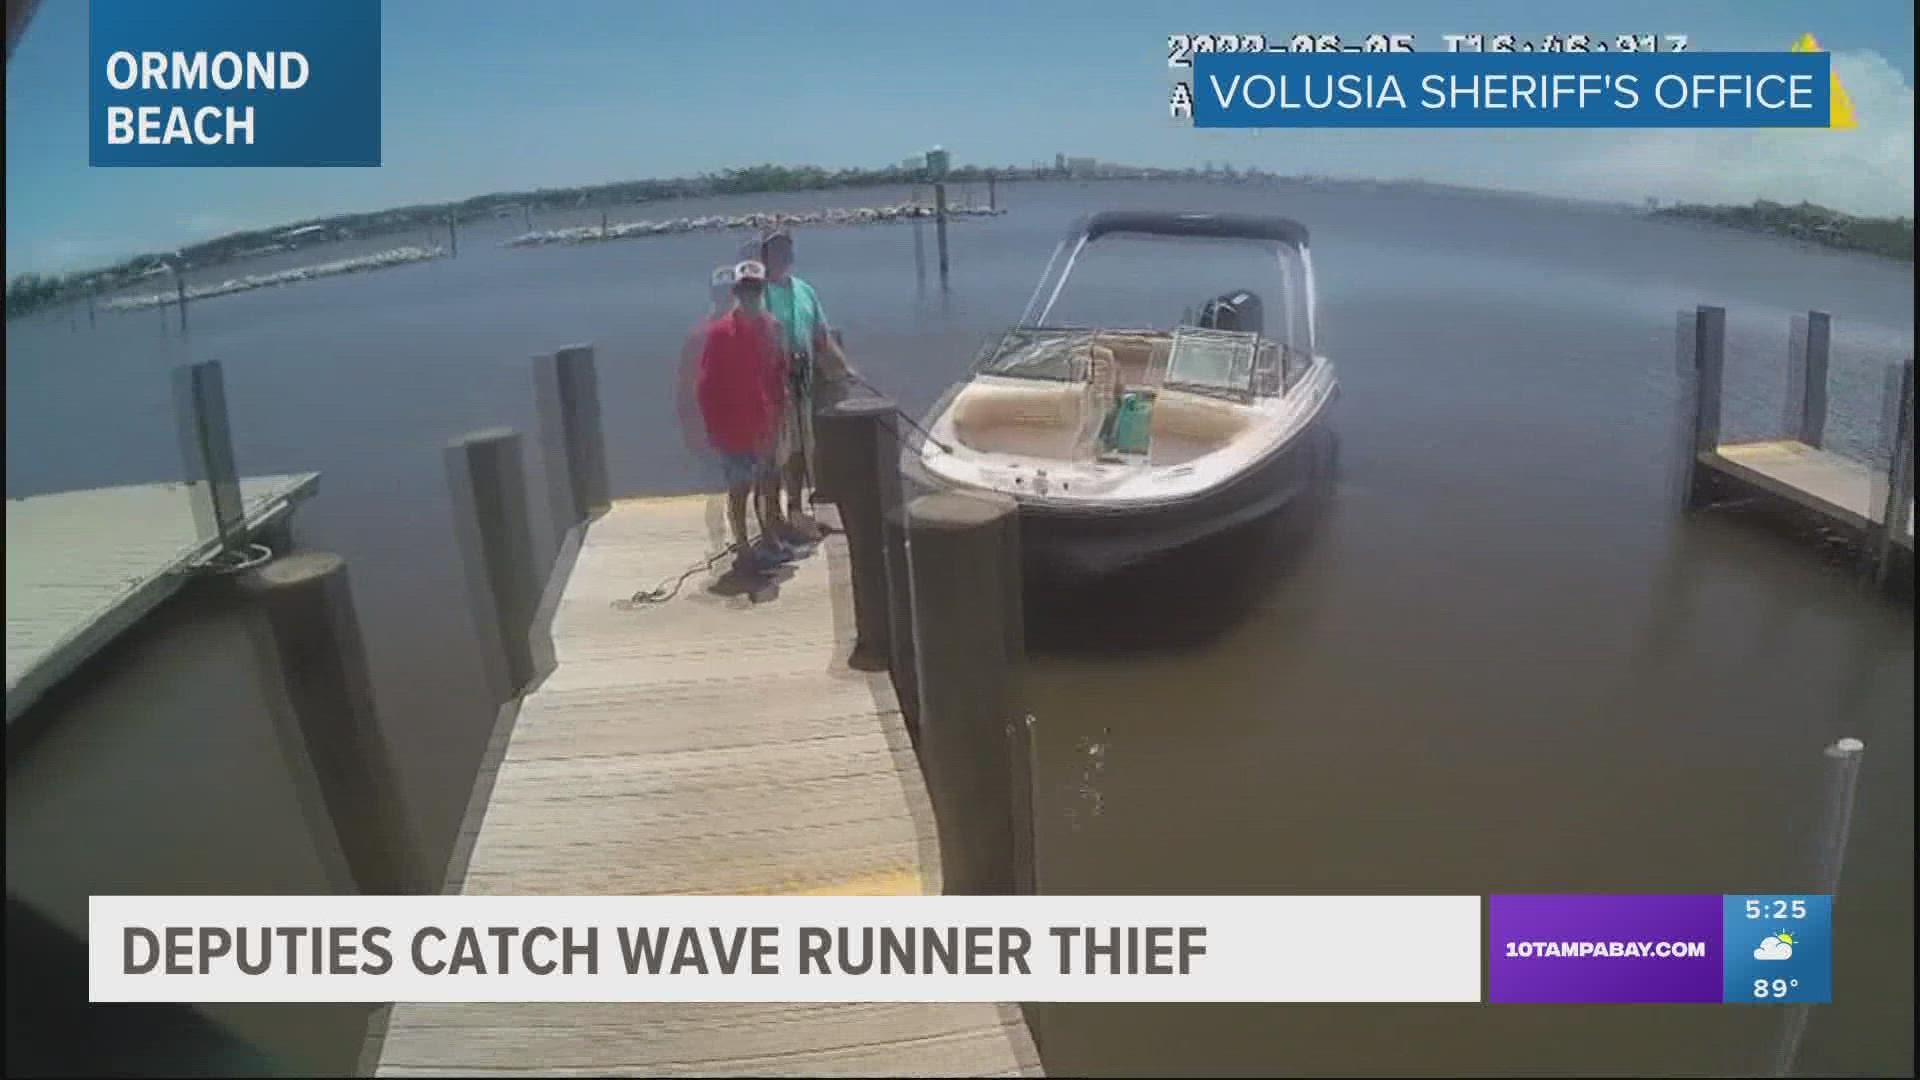 Authorities say the thief told them he couldn't swim.